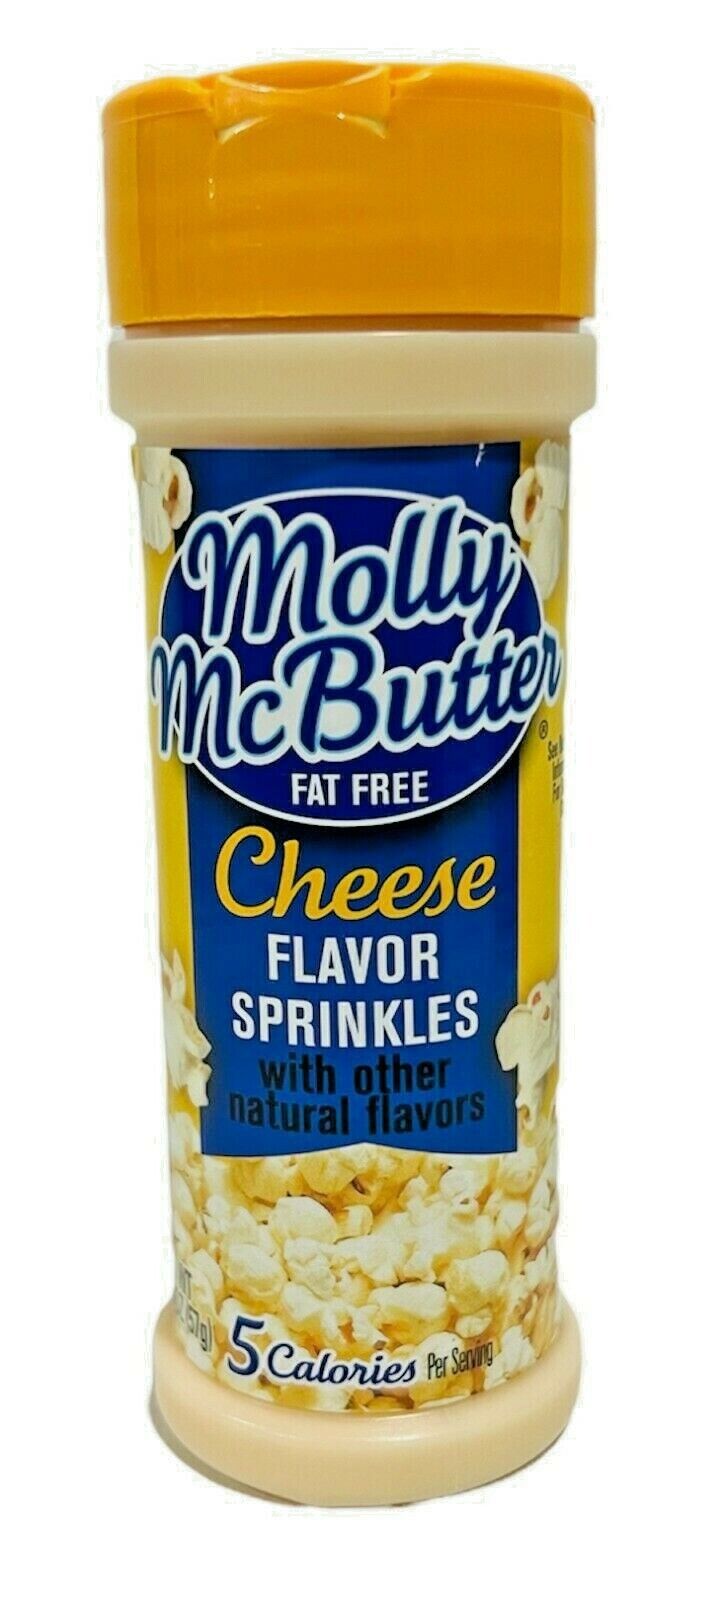 Molly McButter Fat Free Natural Cheese Sprinkles 2 oz